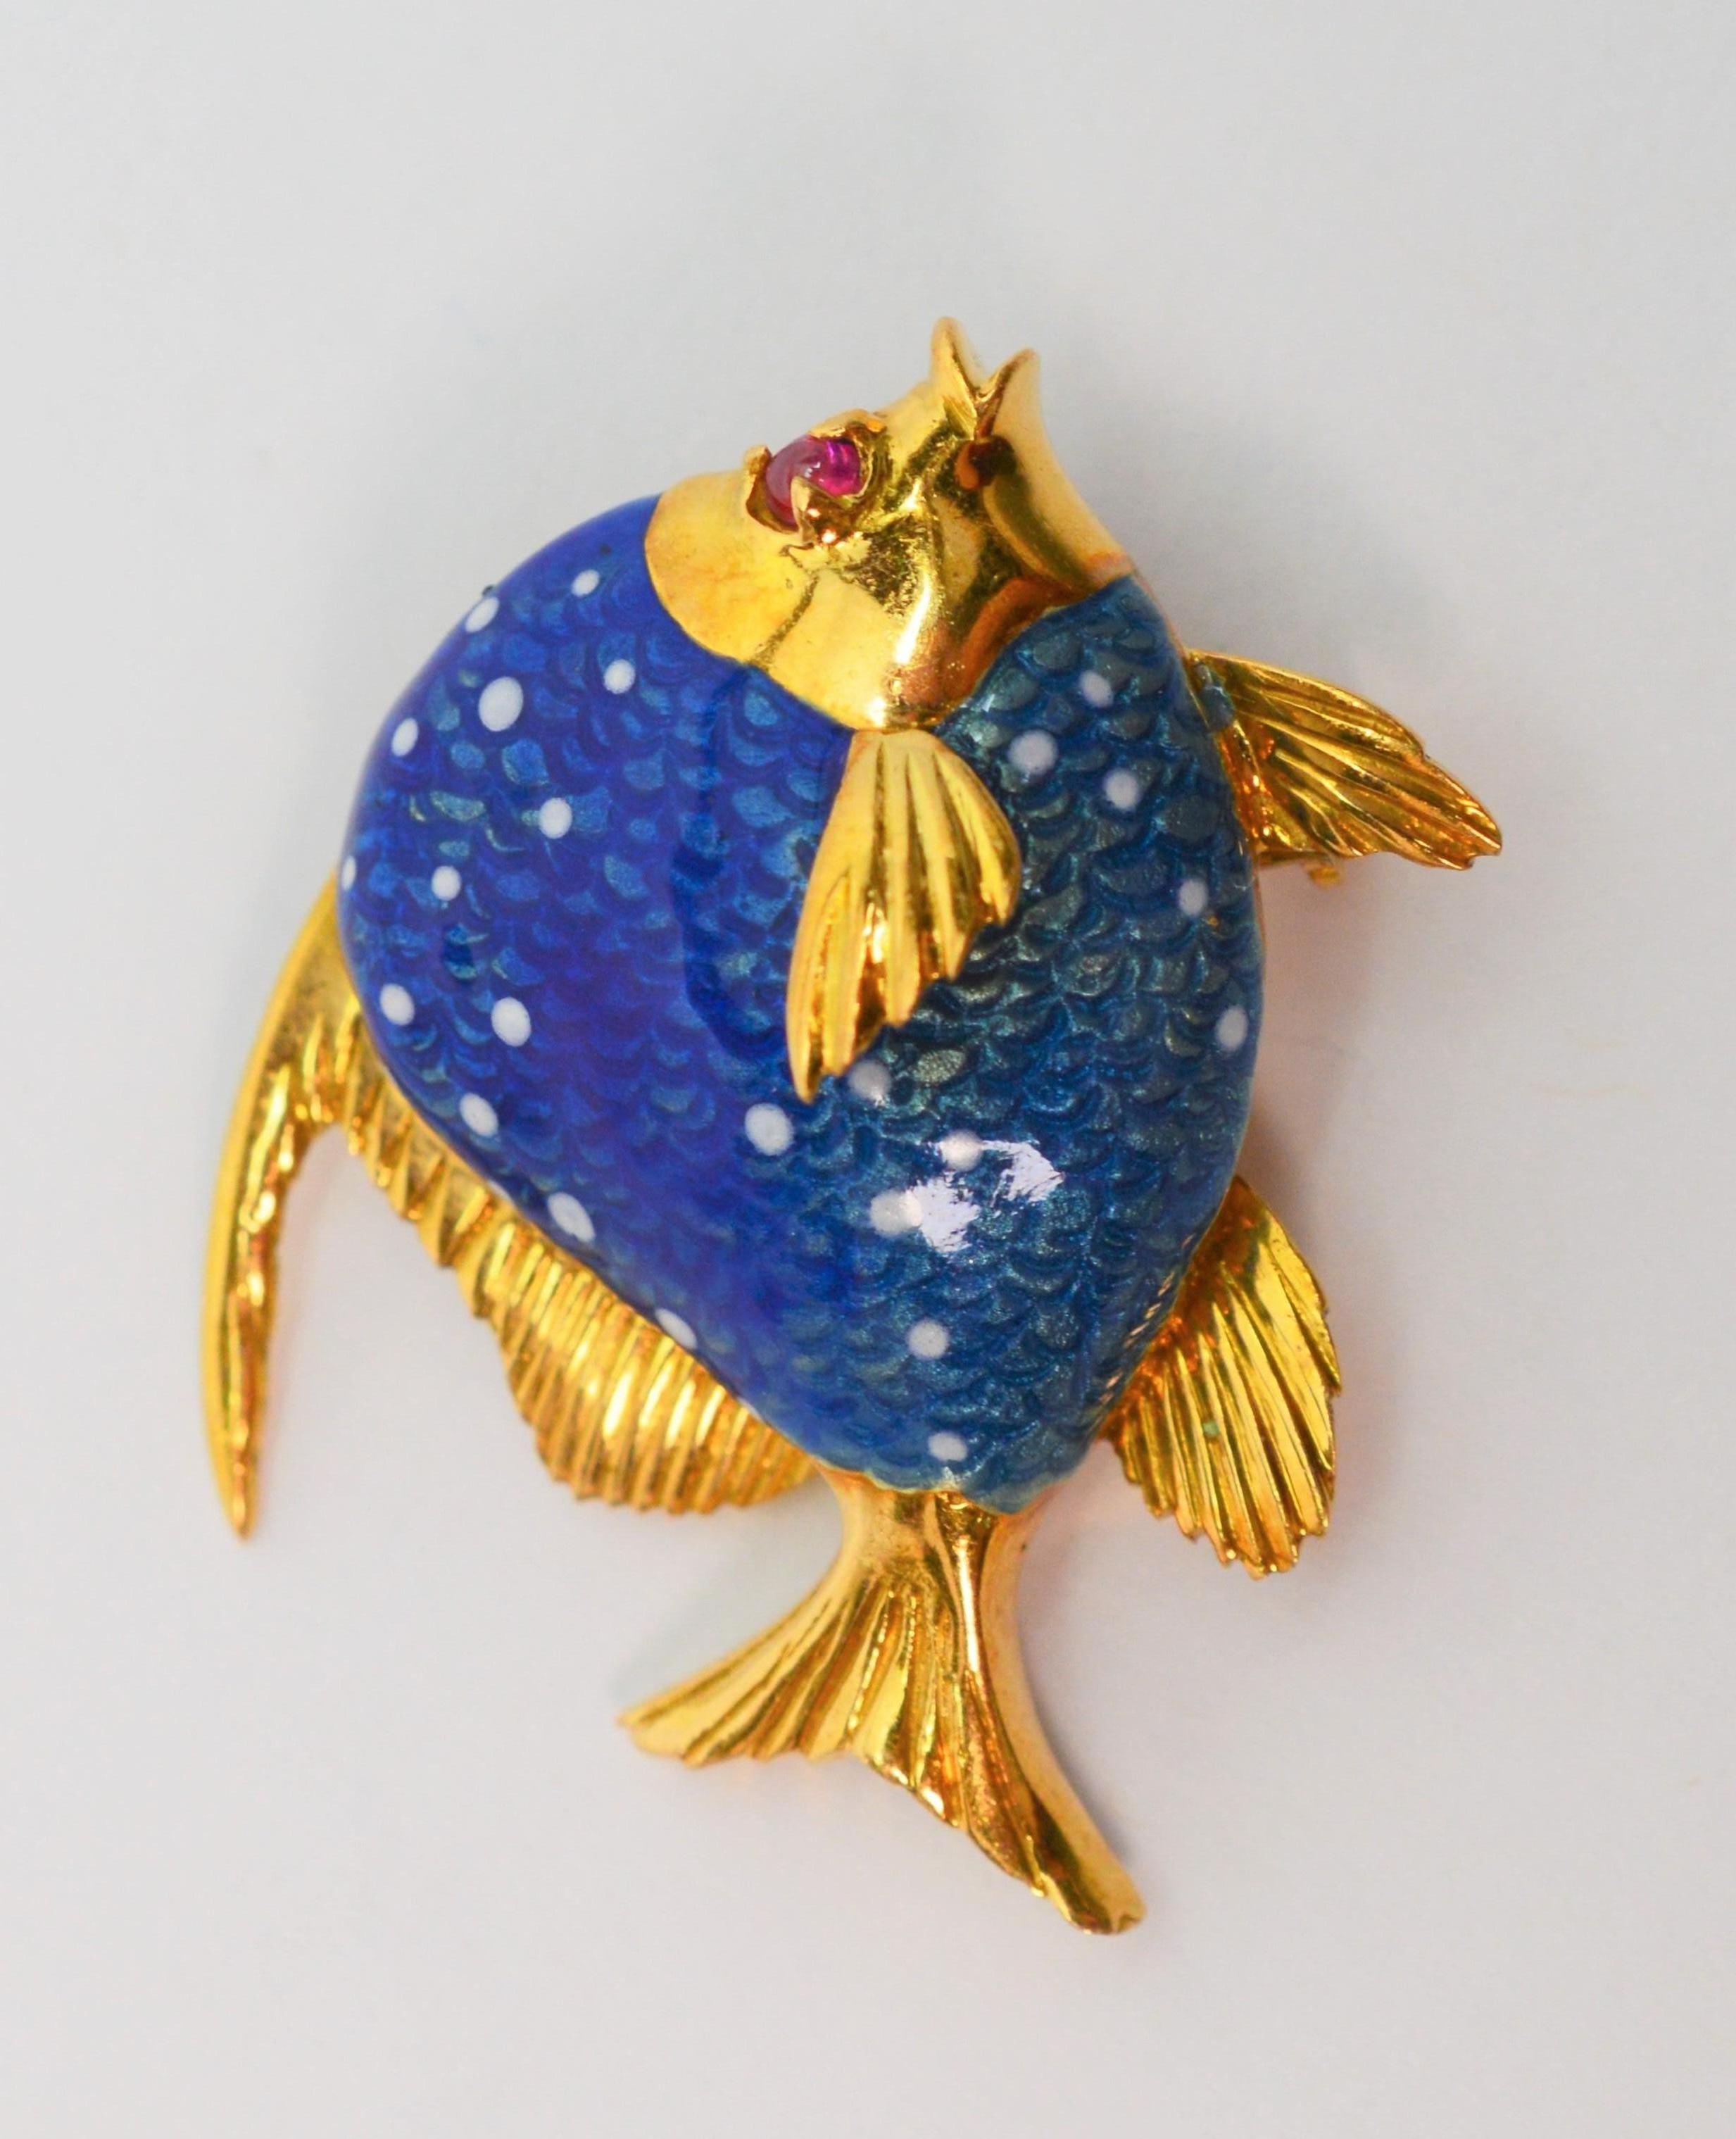 Animated in vibrant hand painted blue enamel this tiny aquatic creature with it ruby eye is a cheerful accent to any lapel or collar. 
Italian made of eighteen karat 18K yellow gold and measures 1-1/4 inches. Fitted with a rollover clasp and stamped